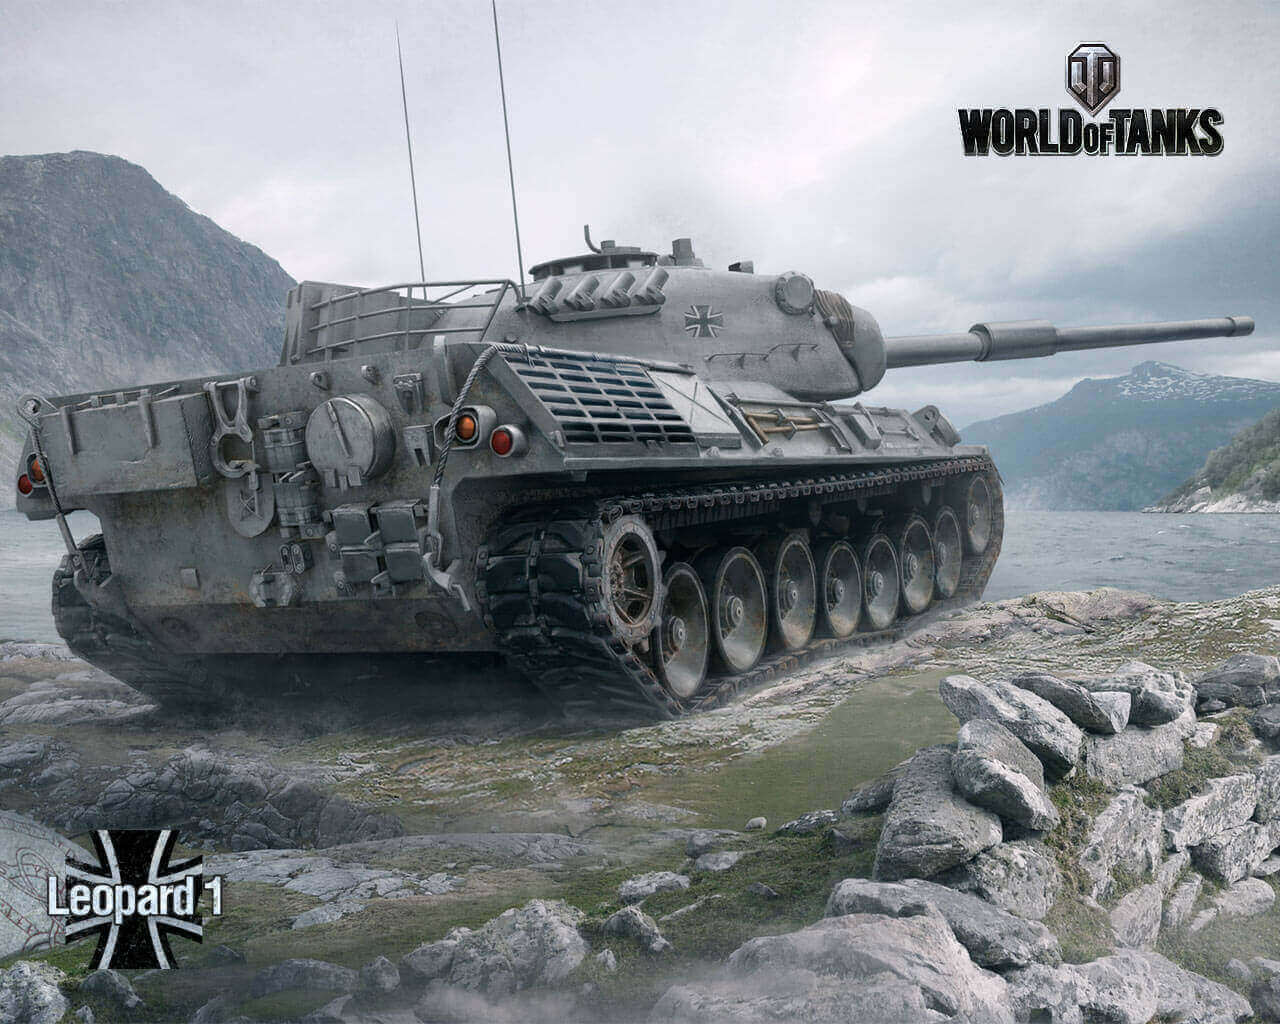 July Posters: Leopard 1